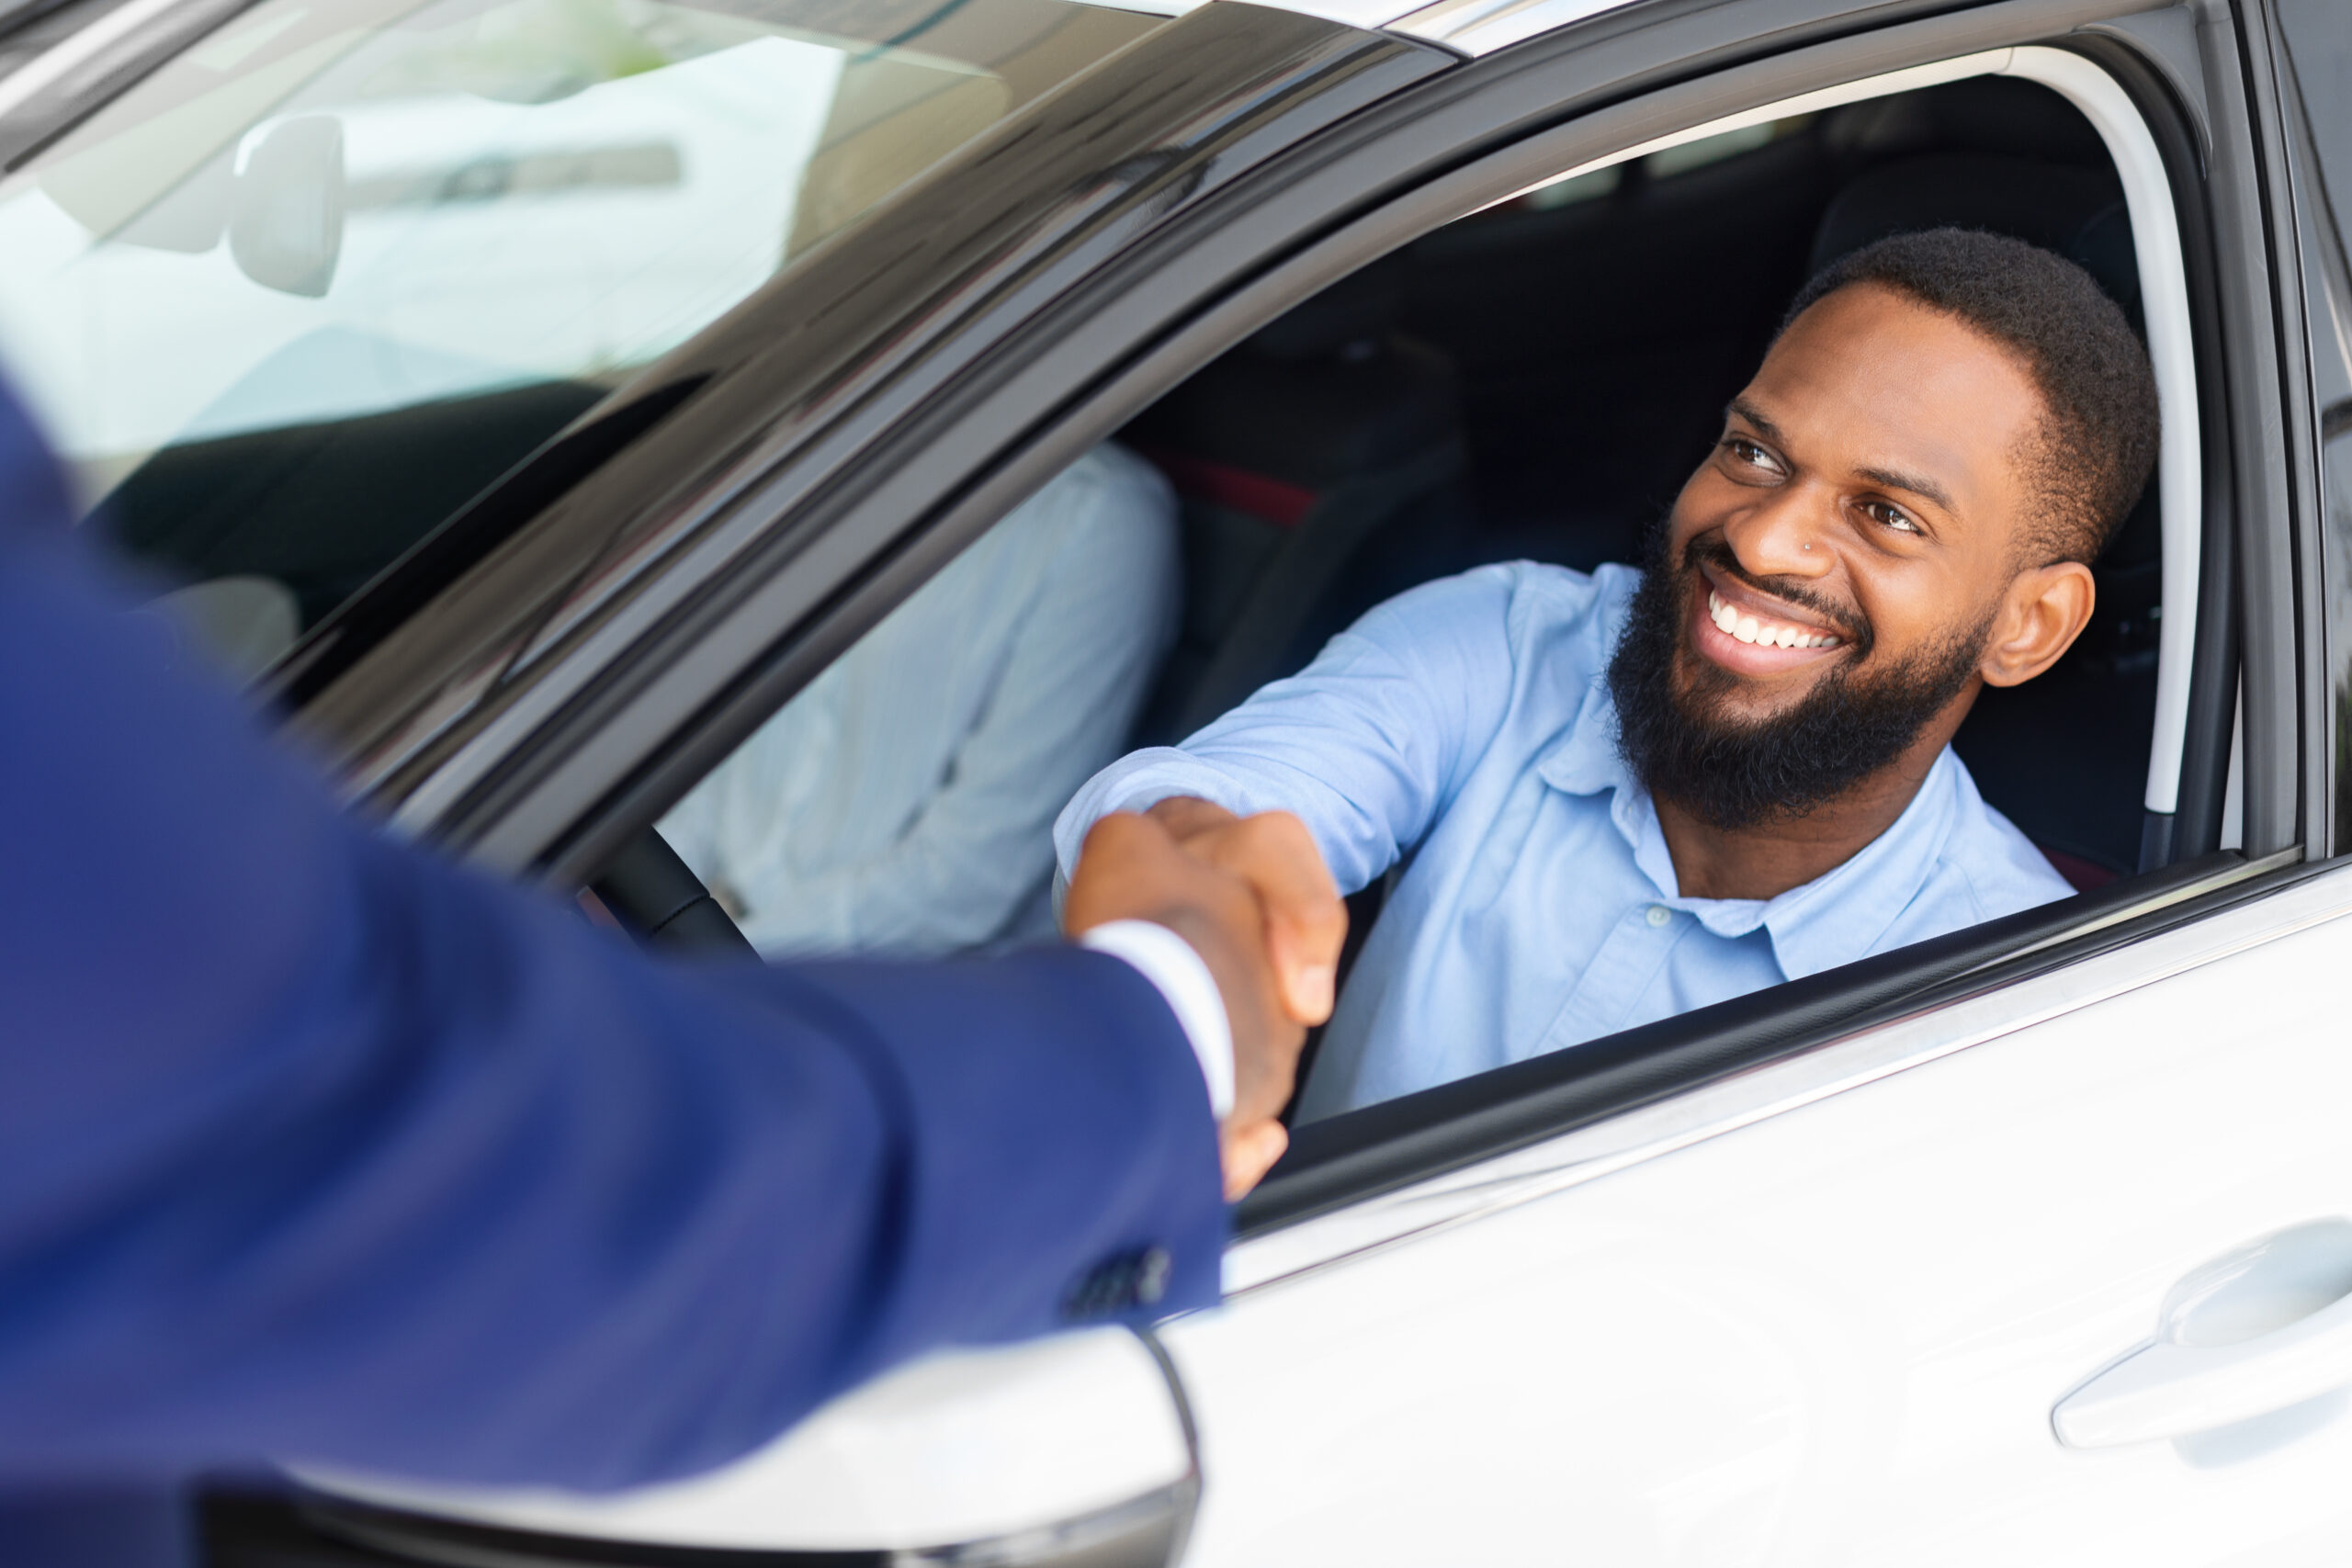 Man shaking someones hand out car window